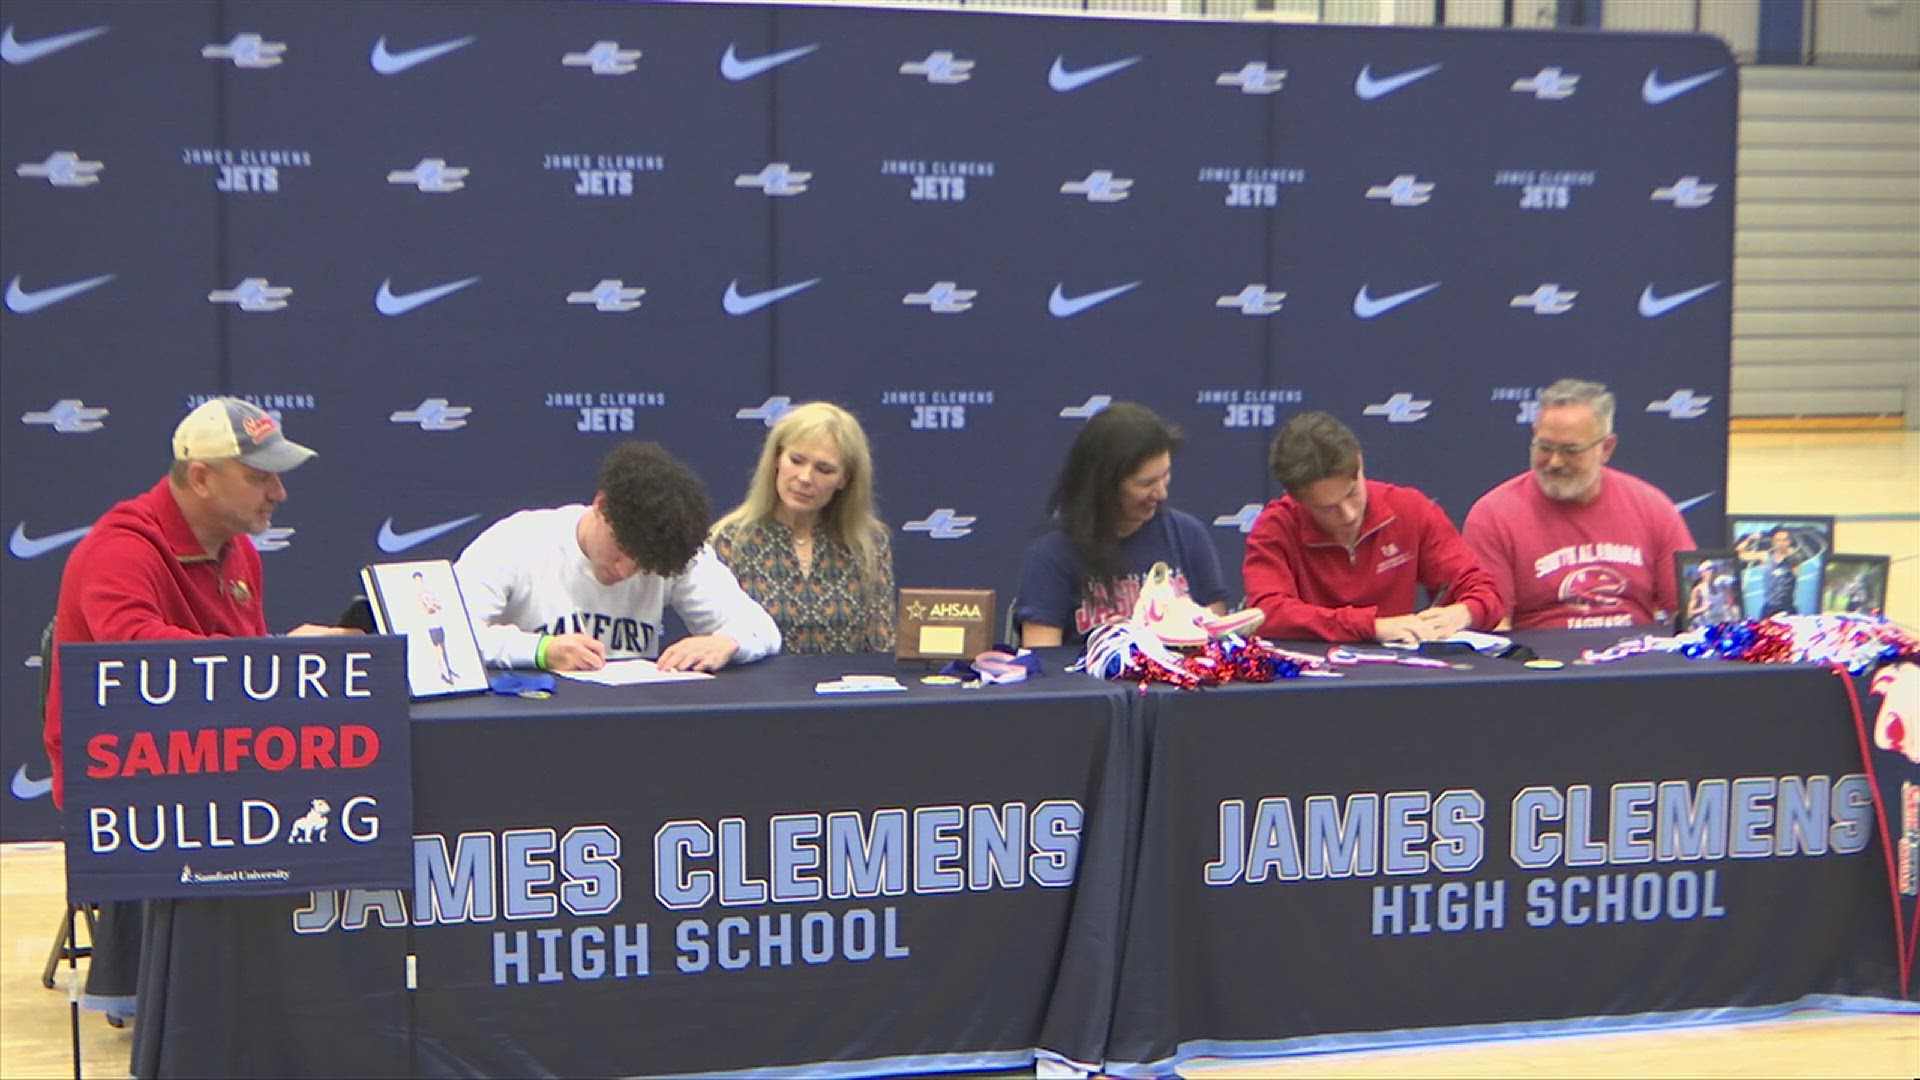 Thomasen will be a field athlete at Samford and Stovall will compete as a long distance runner for South Alabama.